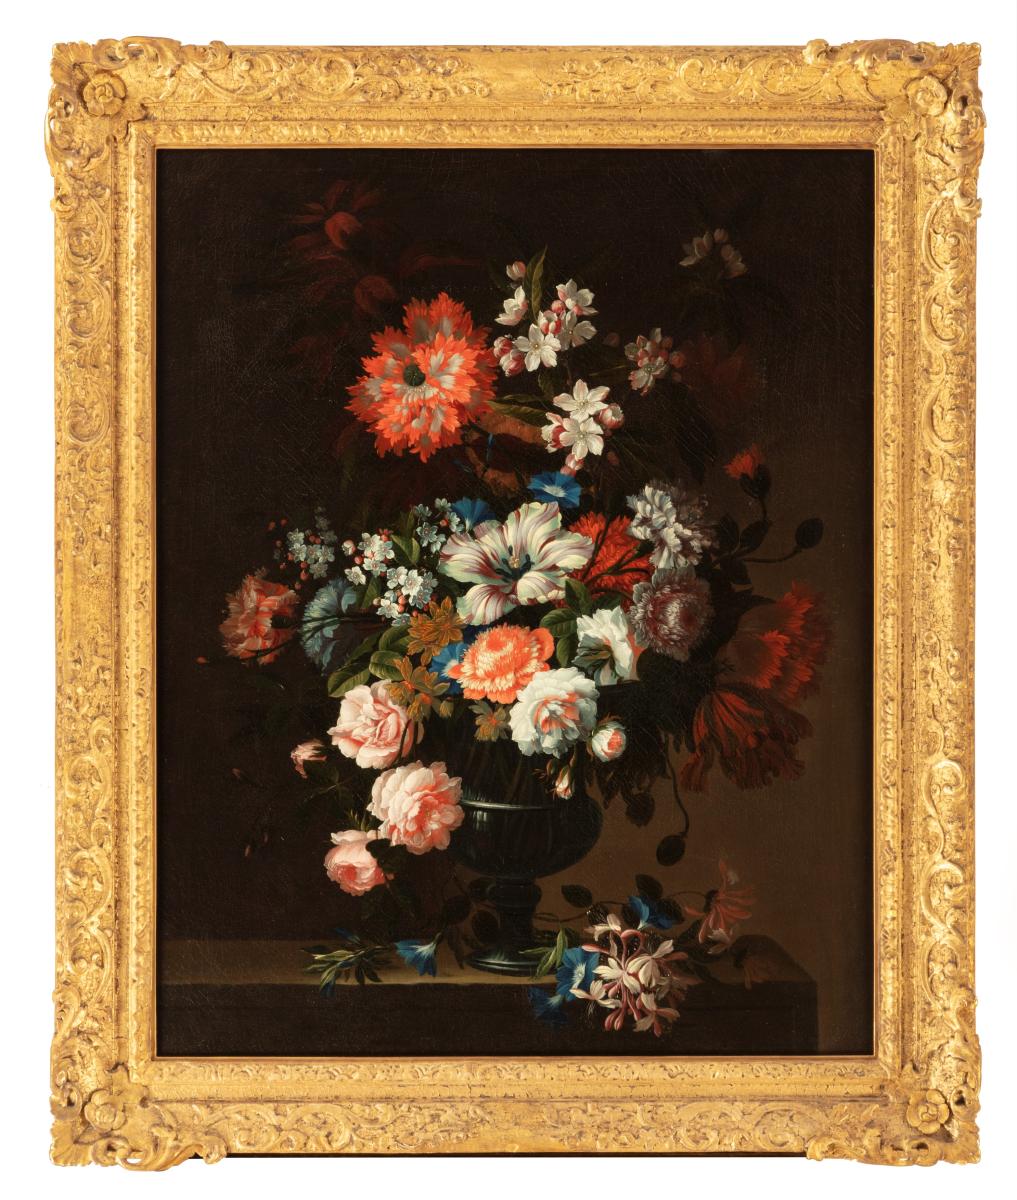 Pieter Hardime, Roses, tulips, carnations and other flowers in a glass vase, with honeysuckle and morning glory on a stone ledge